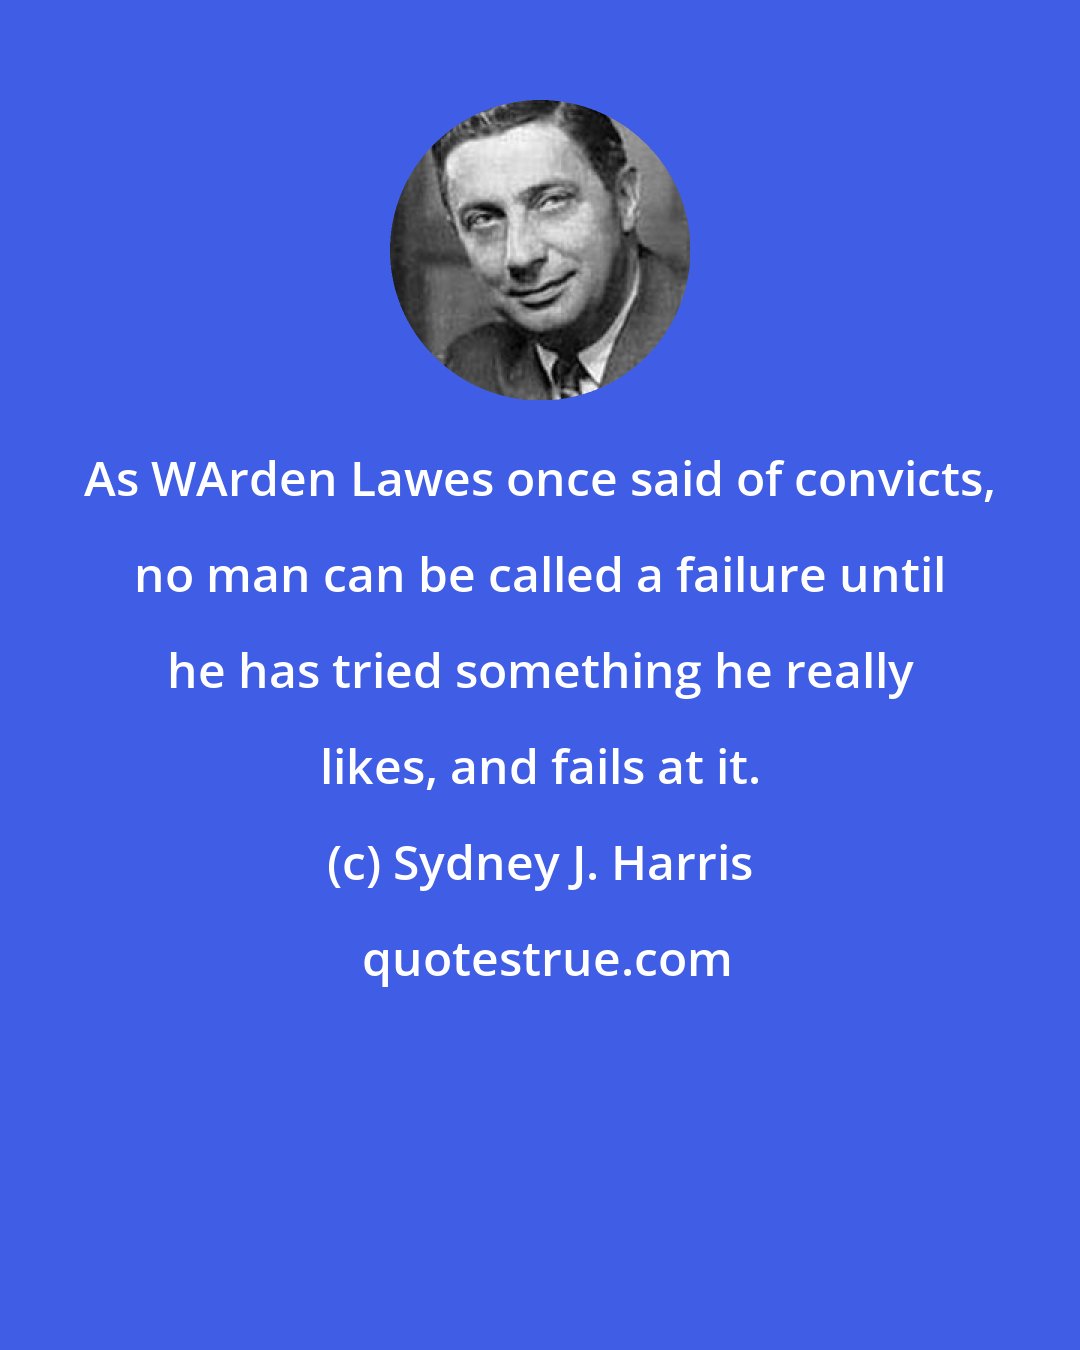 Sydney J. Harris: As WArden Lawes once said of convicts, no man can be called a failure until he has tried something he really likes, and fails at it.